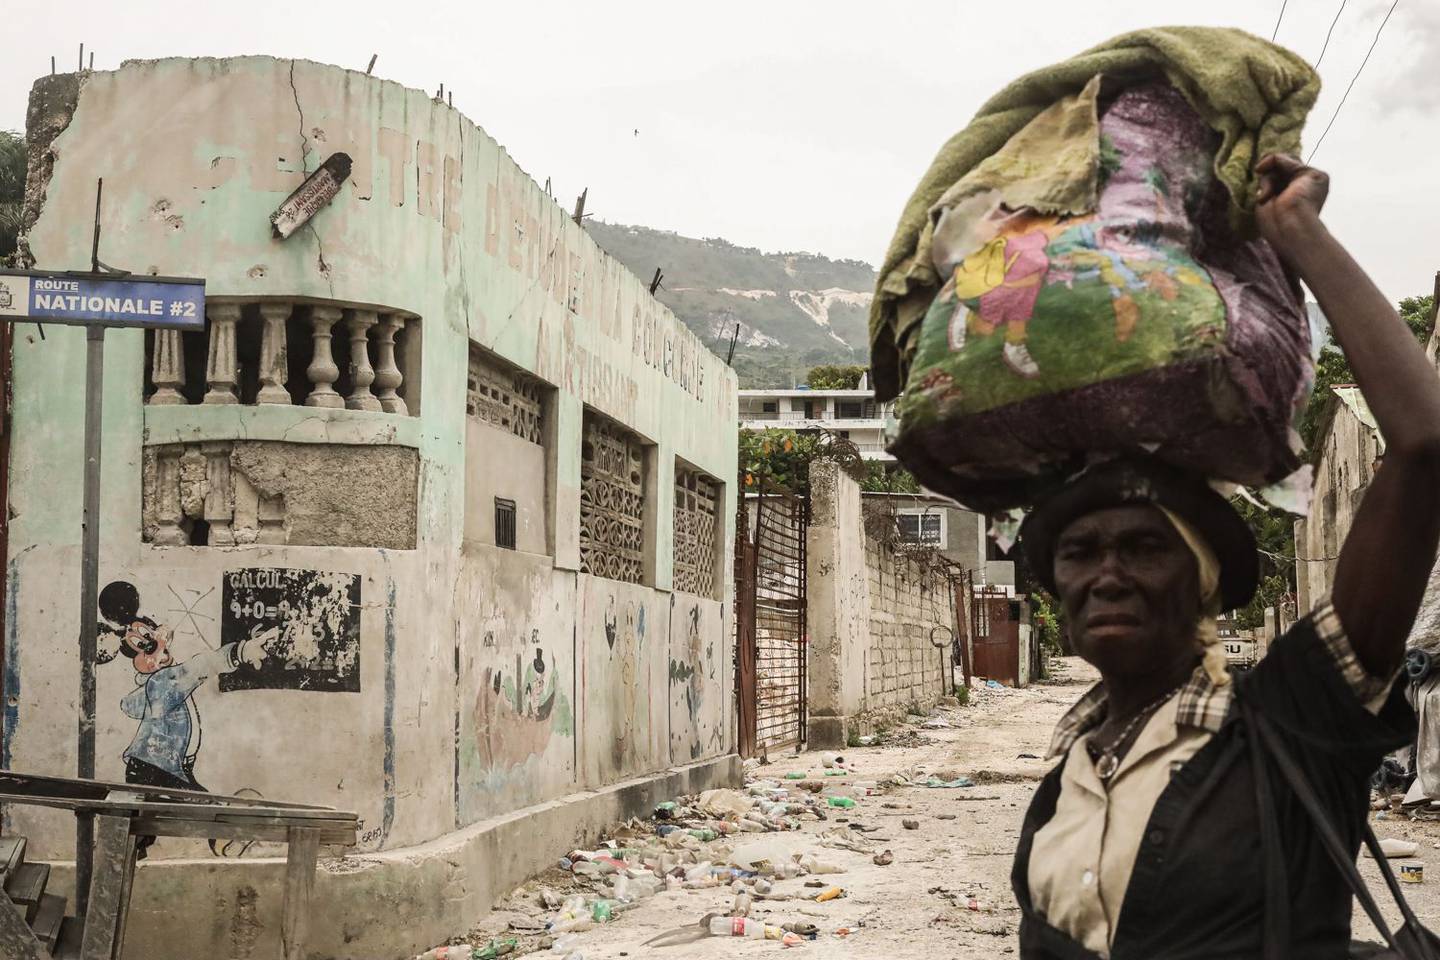 Haiti has been paralyzed by anti-government protests amid anger over rising fuel and food prices. Heavily-armed gangs now control large parts of the capital.